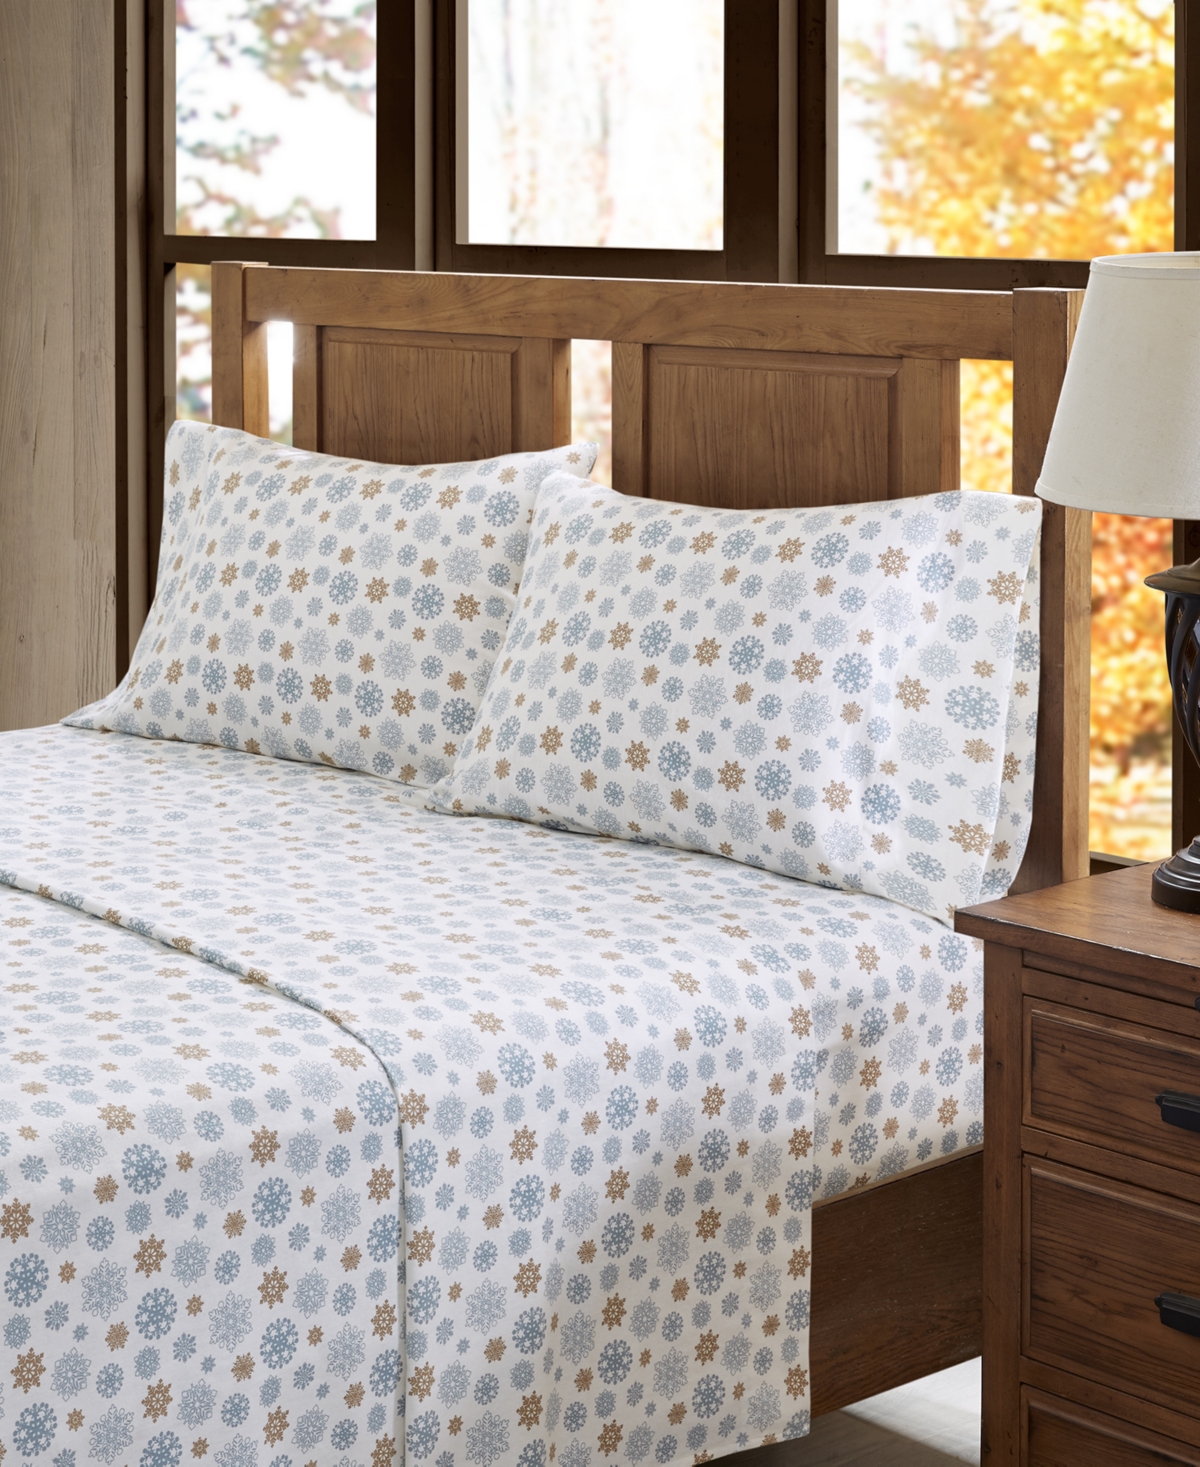 Sleep Philosophy True North By  Novelty Printed Cotton Flannel 4-pc. Sheet Set, Queen In Tan,blue Snowflakes